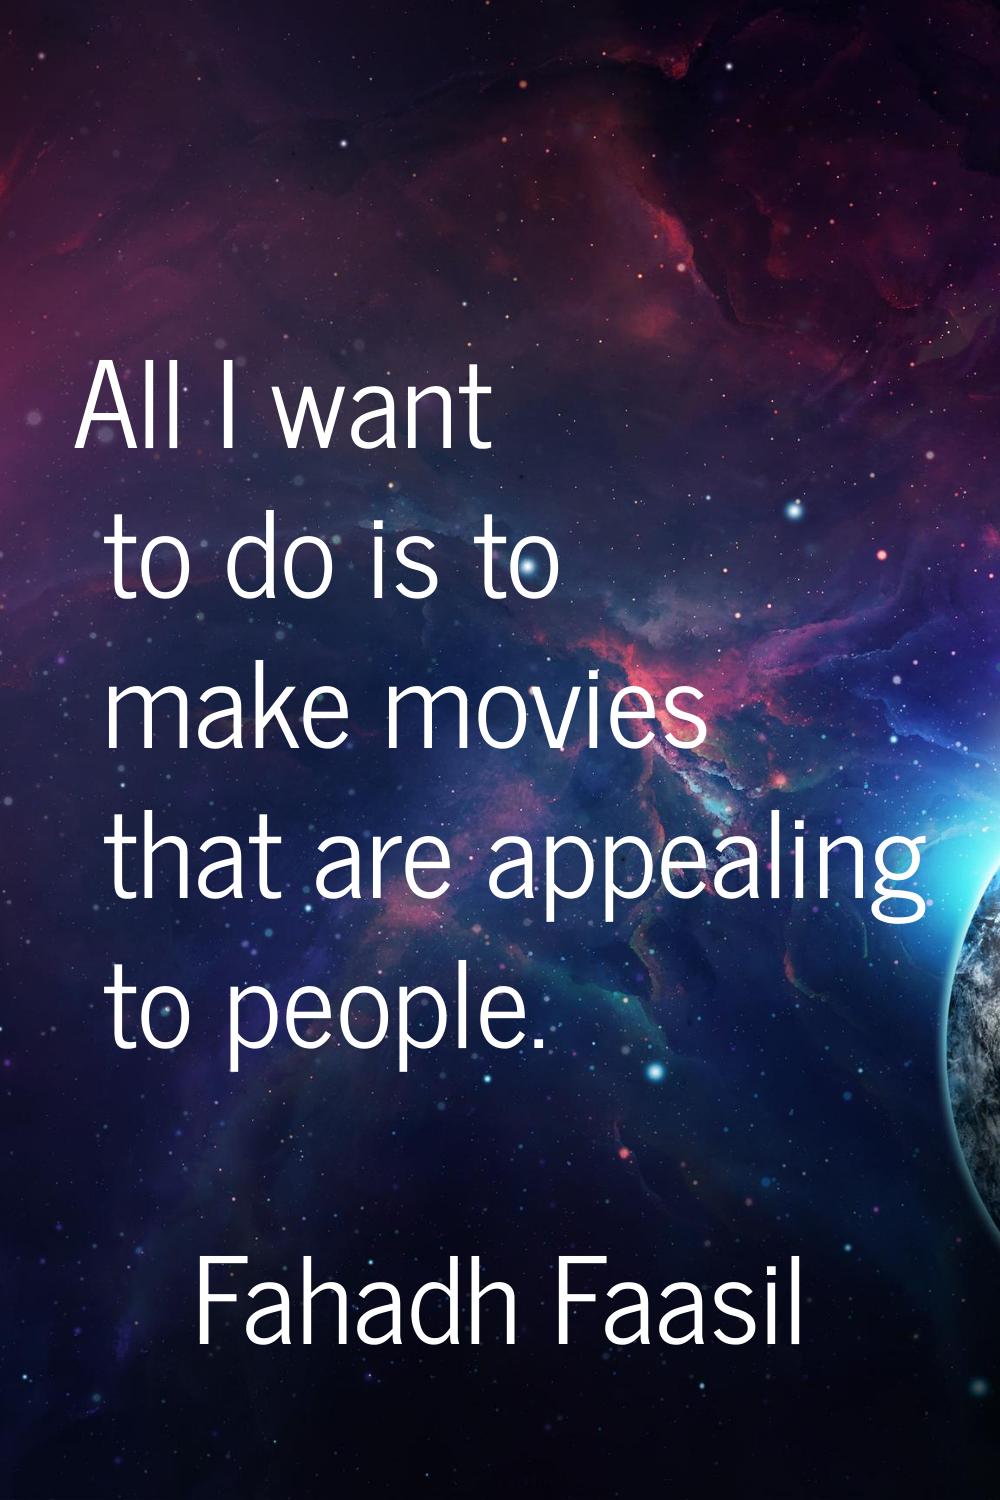 All I want to do is to make movies that are appealing to people.